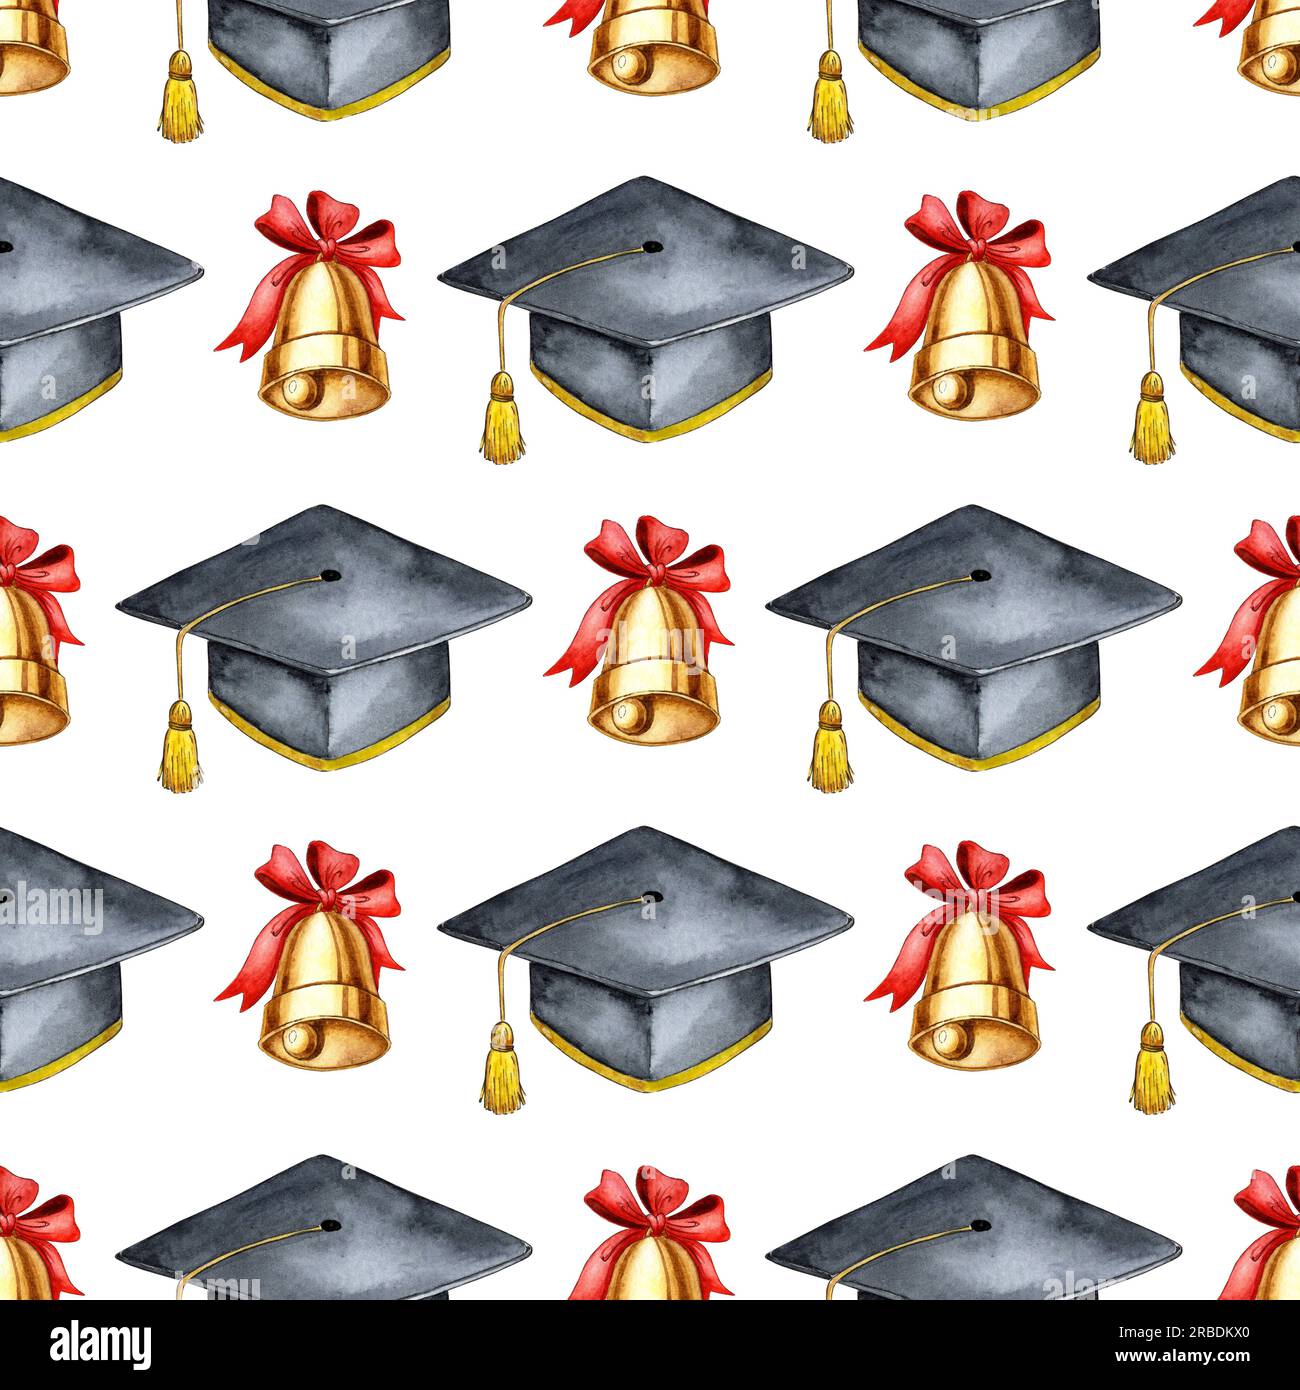 Watercolor illustration of a pattern of uniform caps and a bell with a ribbon dedicated to the graduation of academic students. Black varsity hat with Stock Photo